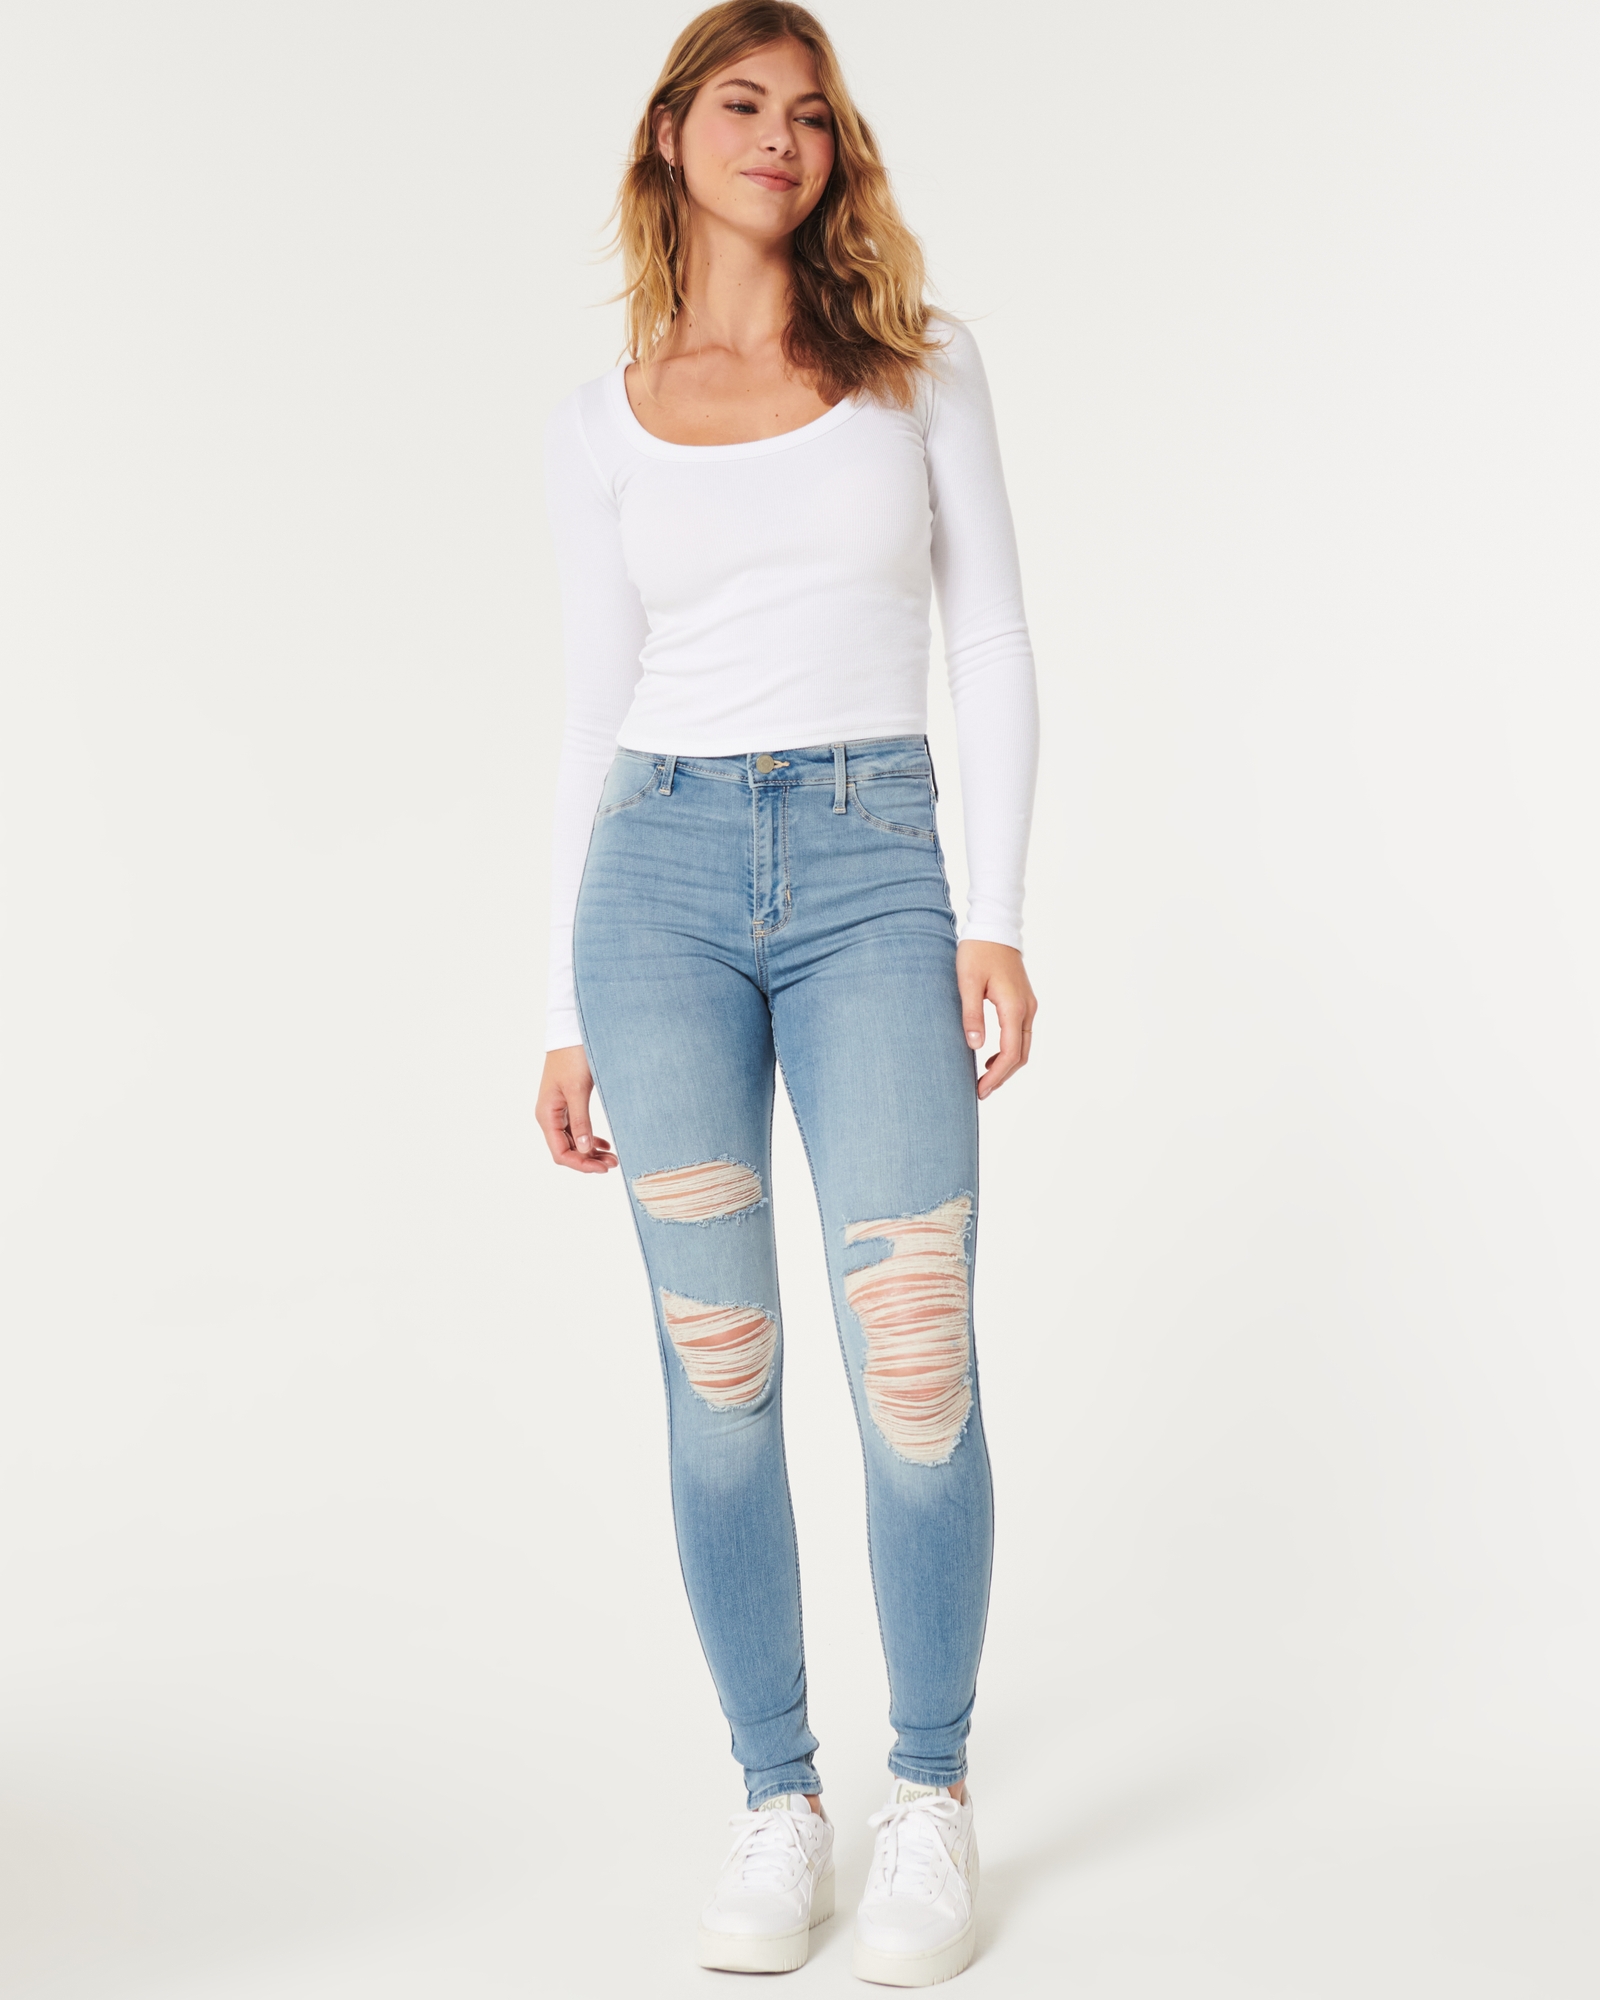 Hollister Low Rise Jean Legging  Clothes design, Ripped jeggings